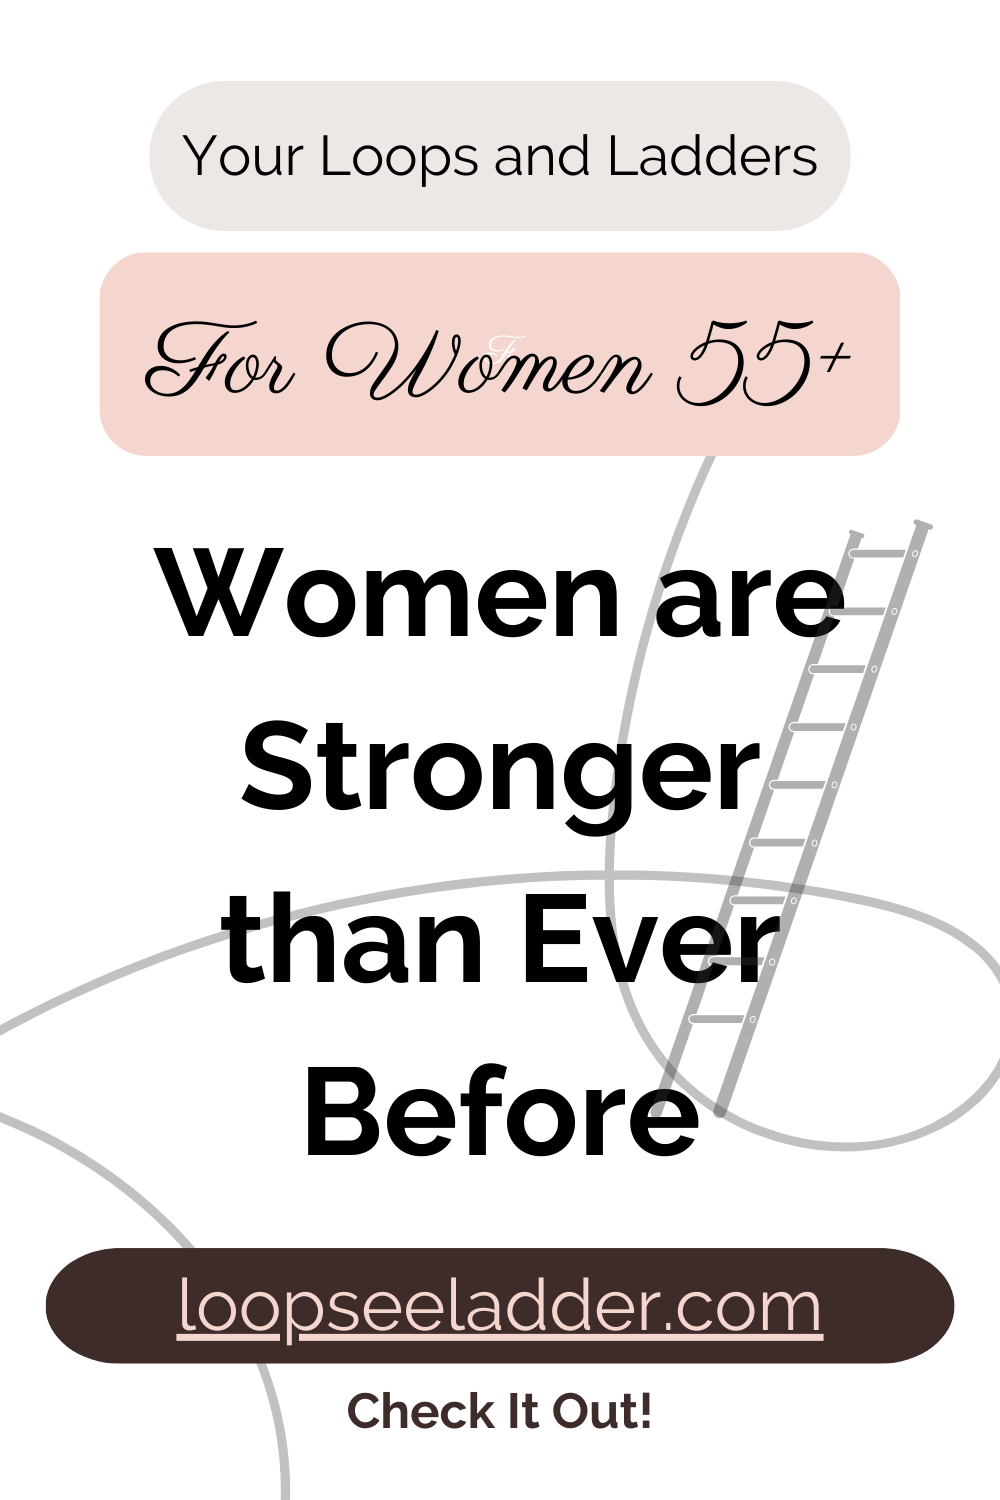 Why Women Over 55 Are Stronger Than Ever Before